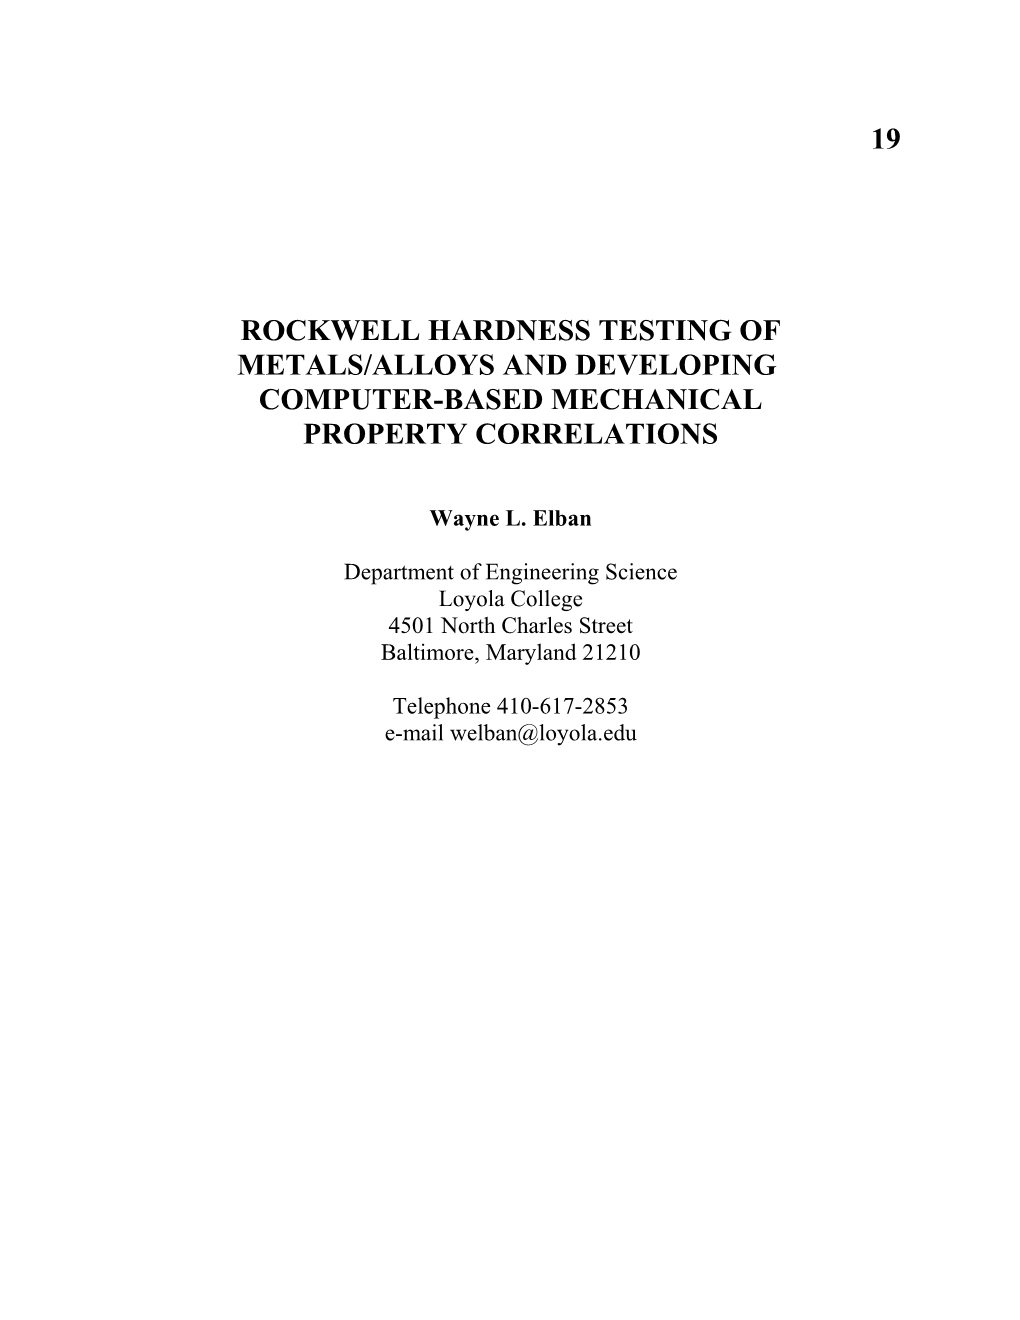 Rockwell Hardness Testing of Metals/Alloys And